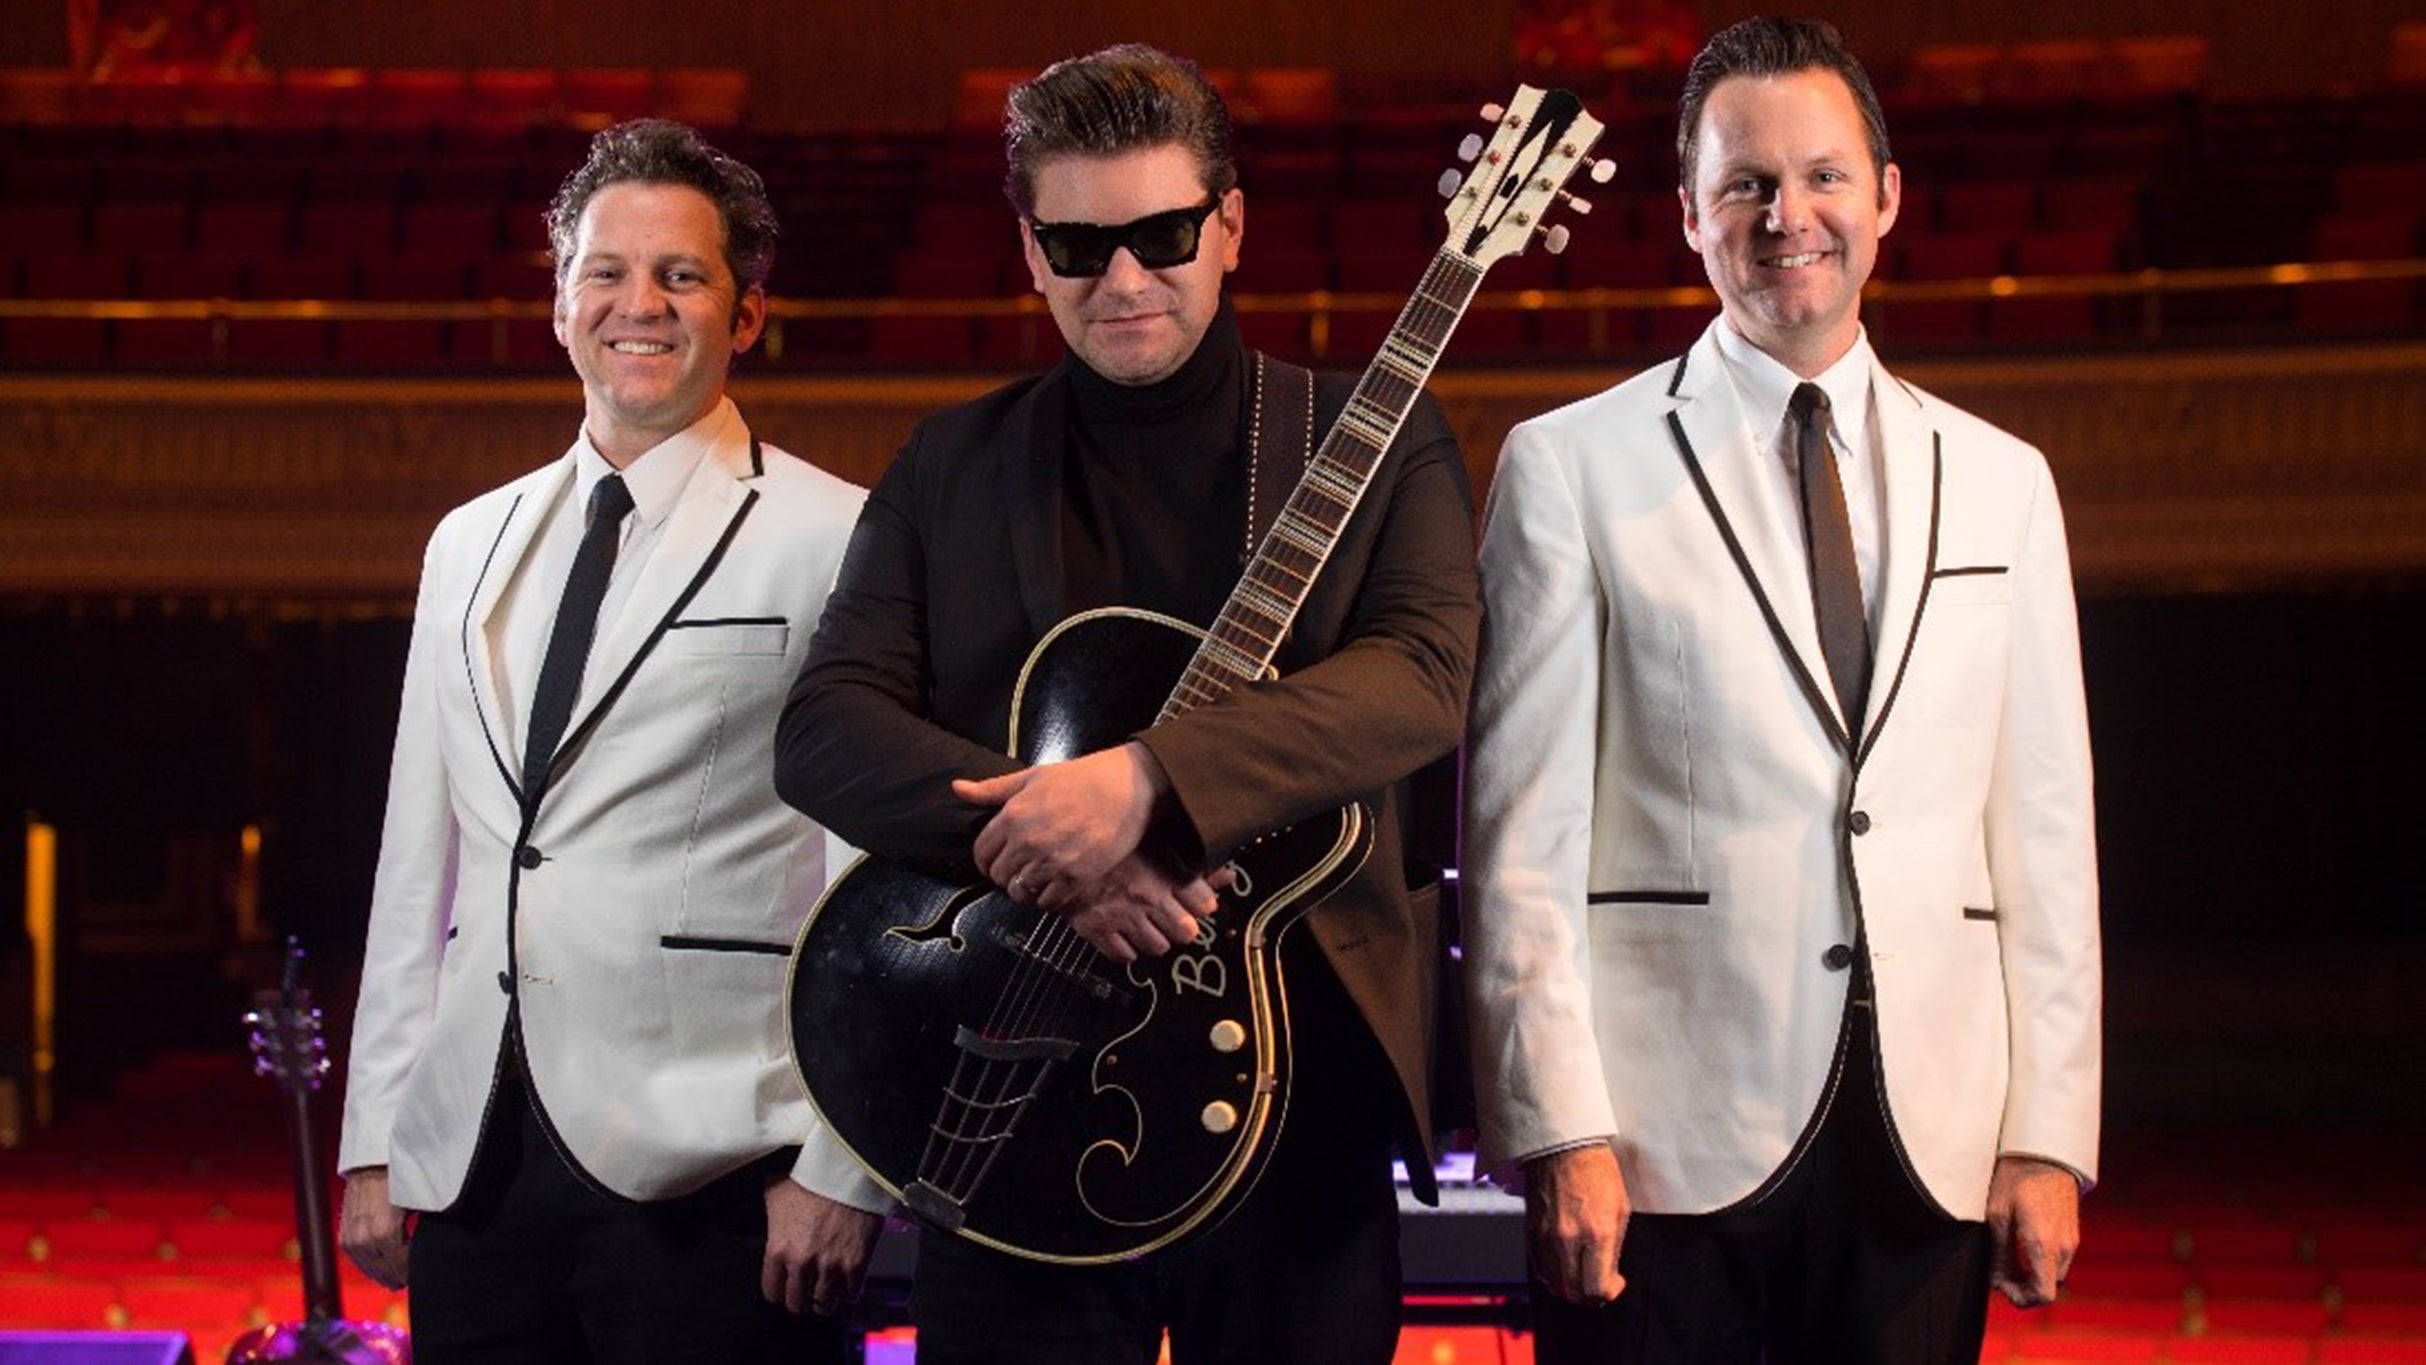 Roy Orbison and Everly Brothers Reimagined in Atlantic City promo photo for Social Media presale offer code